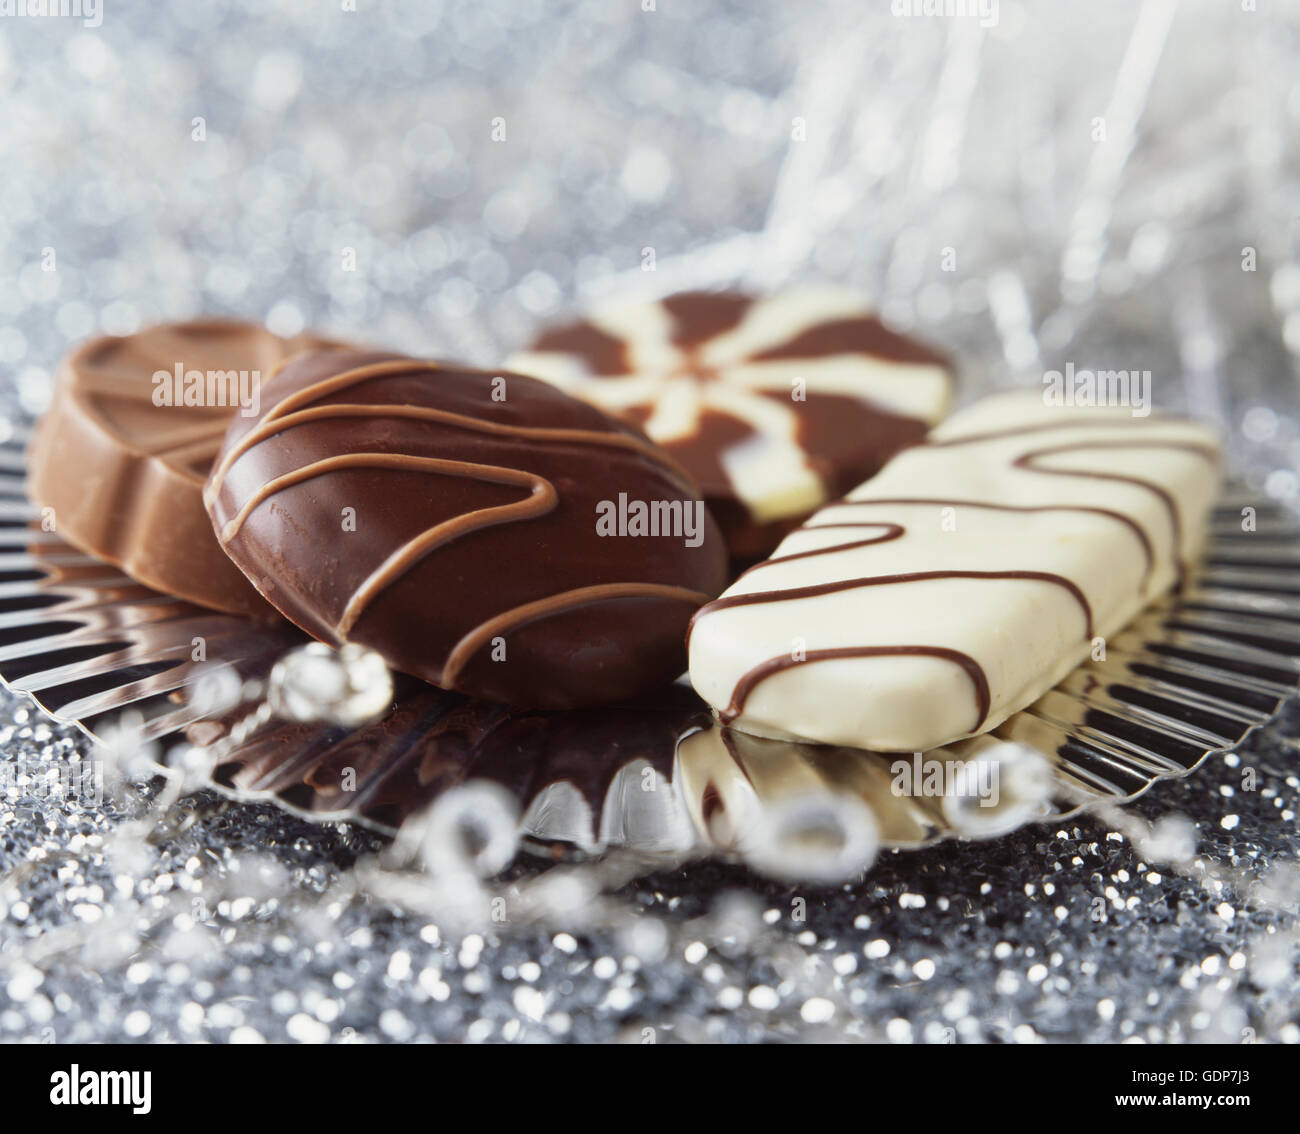 Sweet food, chocolate biscuit selection Stock Photo